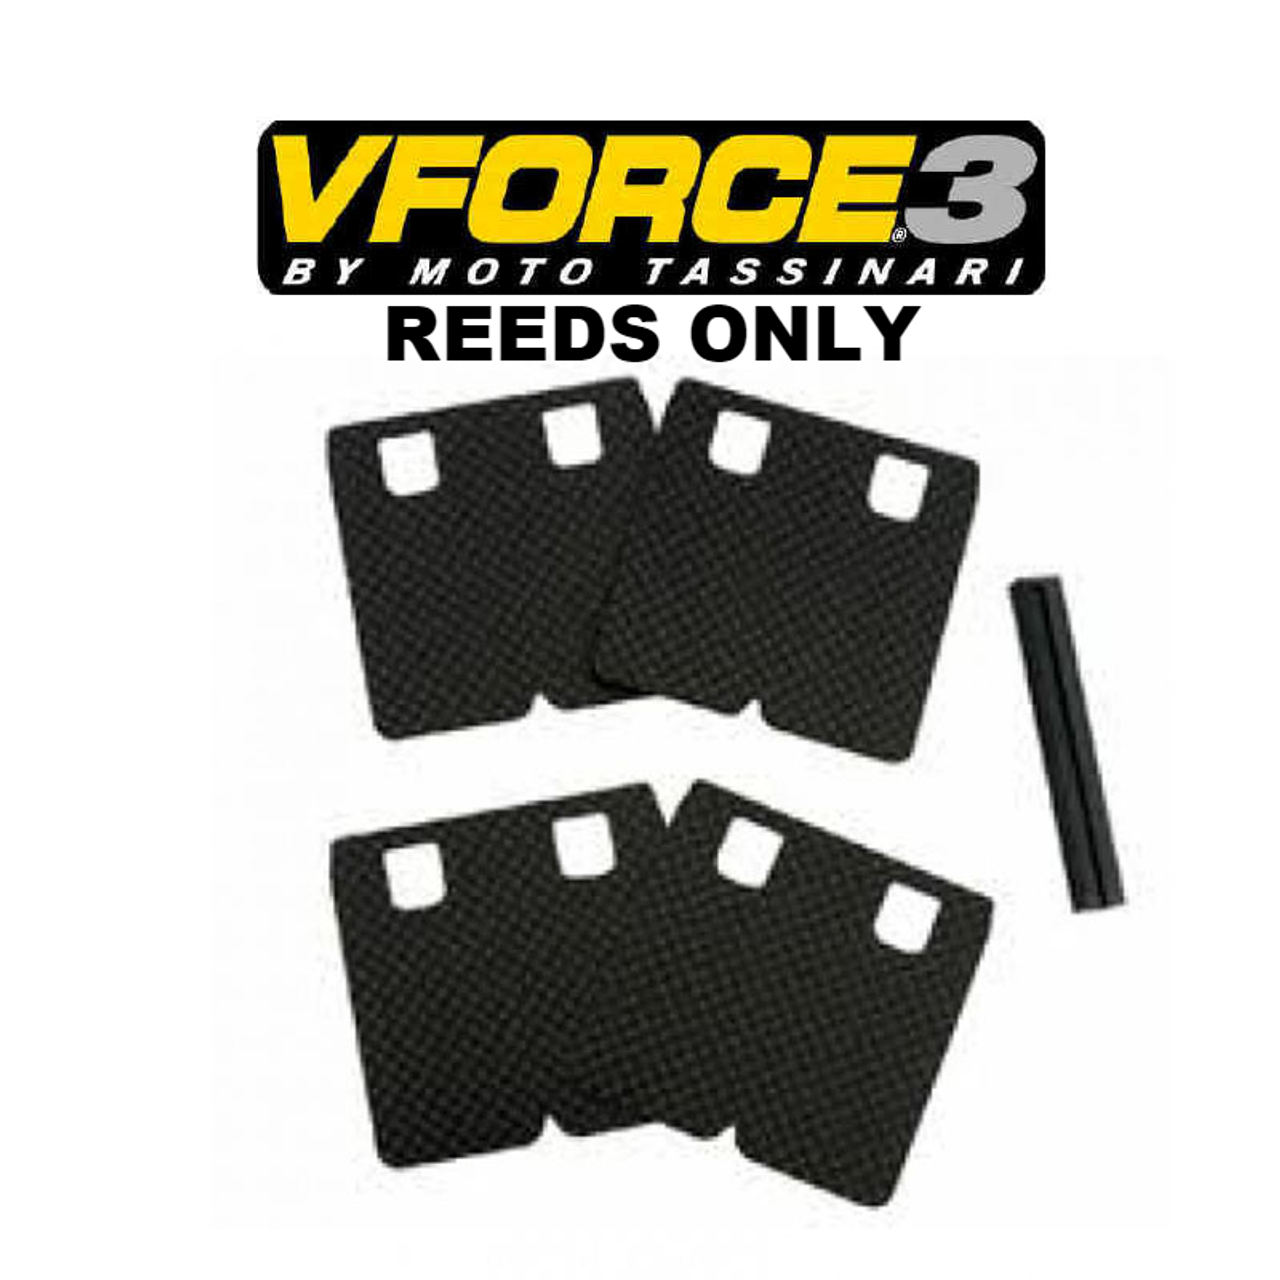 Moto Tassinari Replacement Reed Petals for V-Force 3 Reed System 3P883A